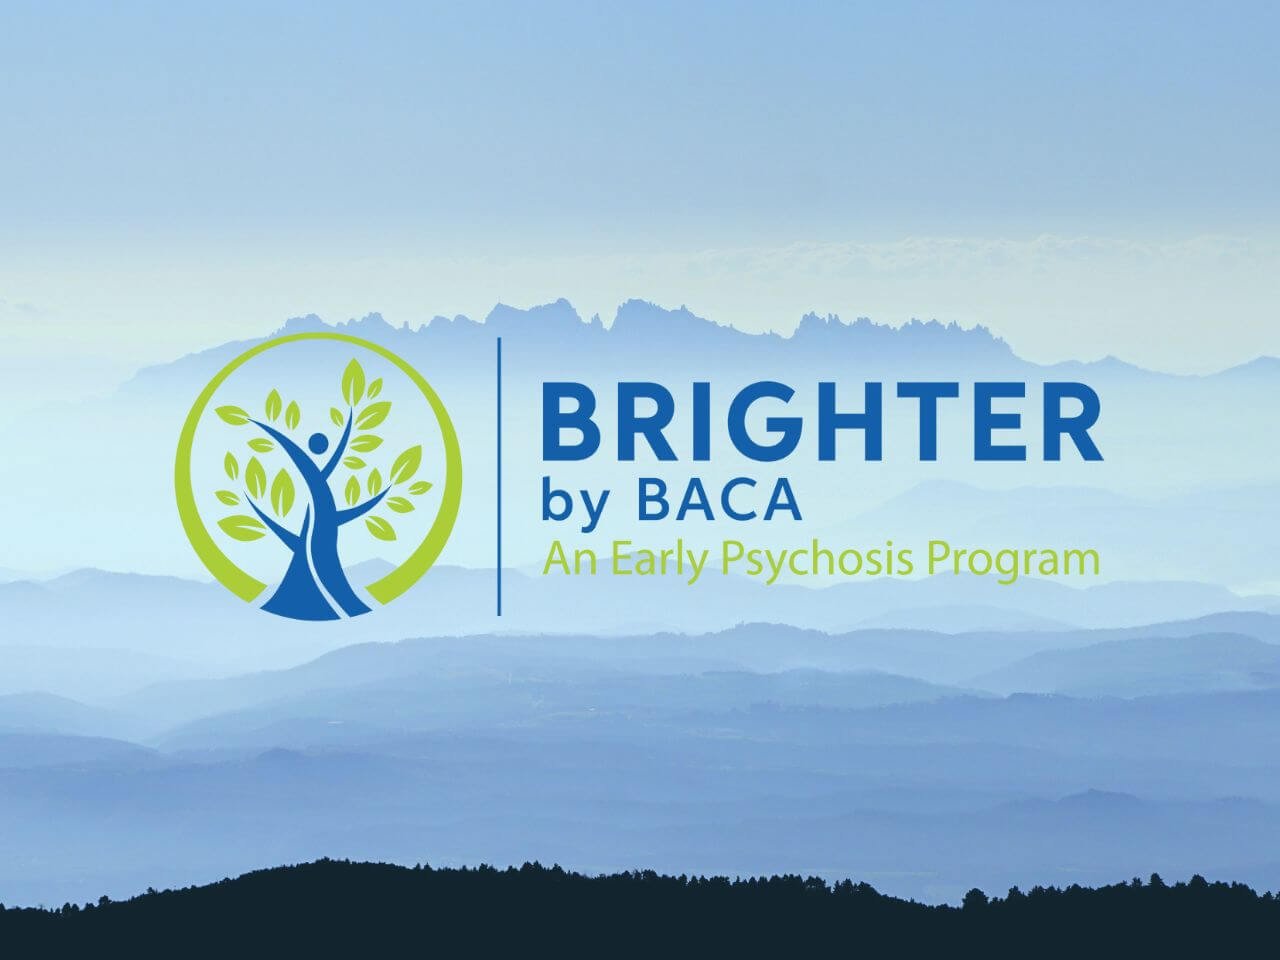 Bay Area Clinical Associates Launches Early Psychosis Intensive Outpatient Program for Emerging Adults